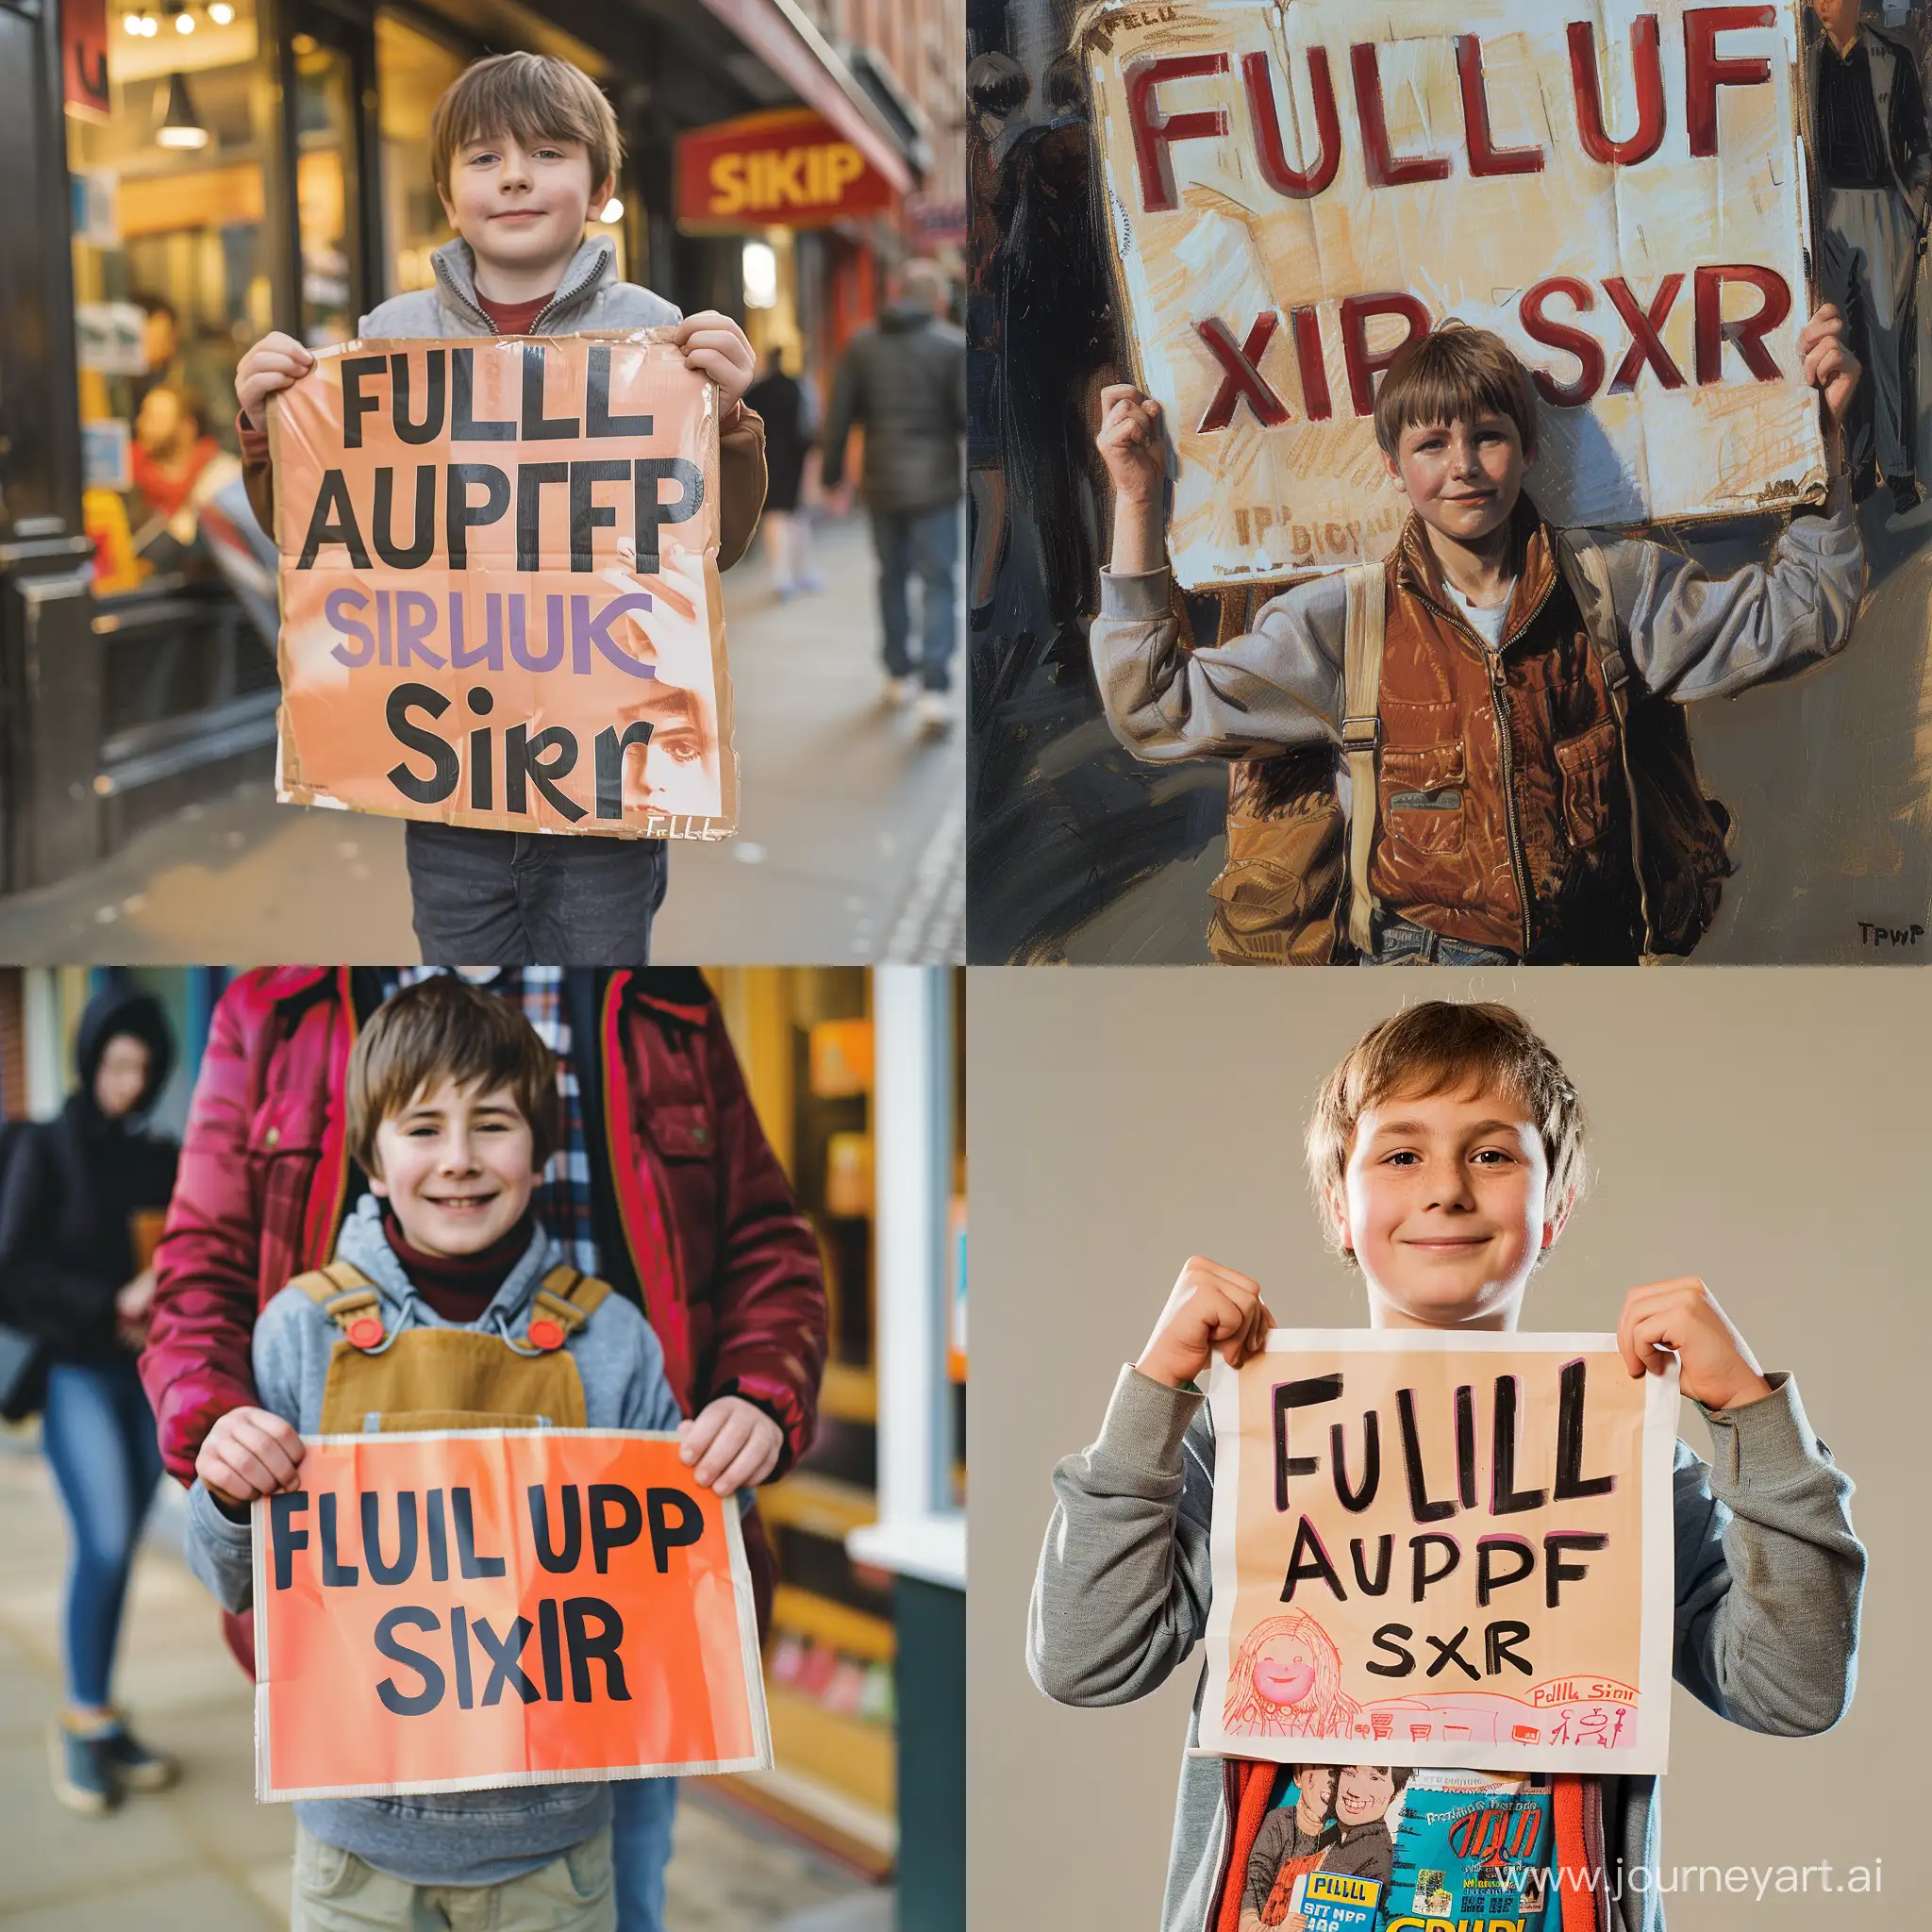 a boy holding a poster that says "Full support sir"